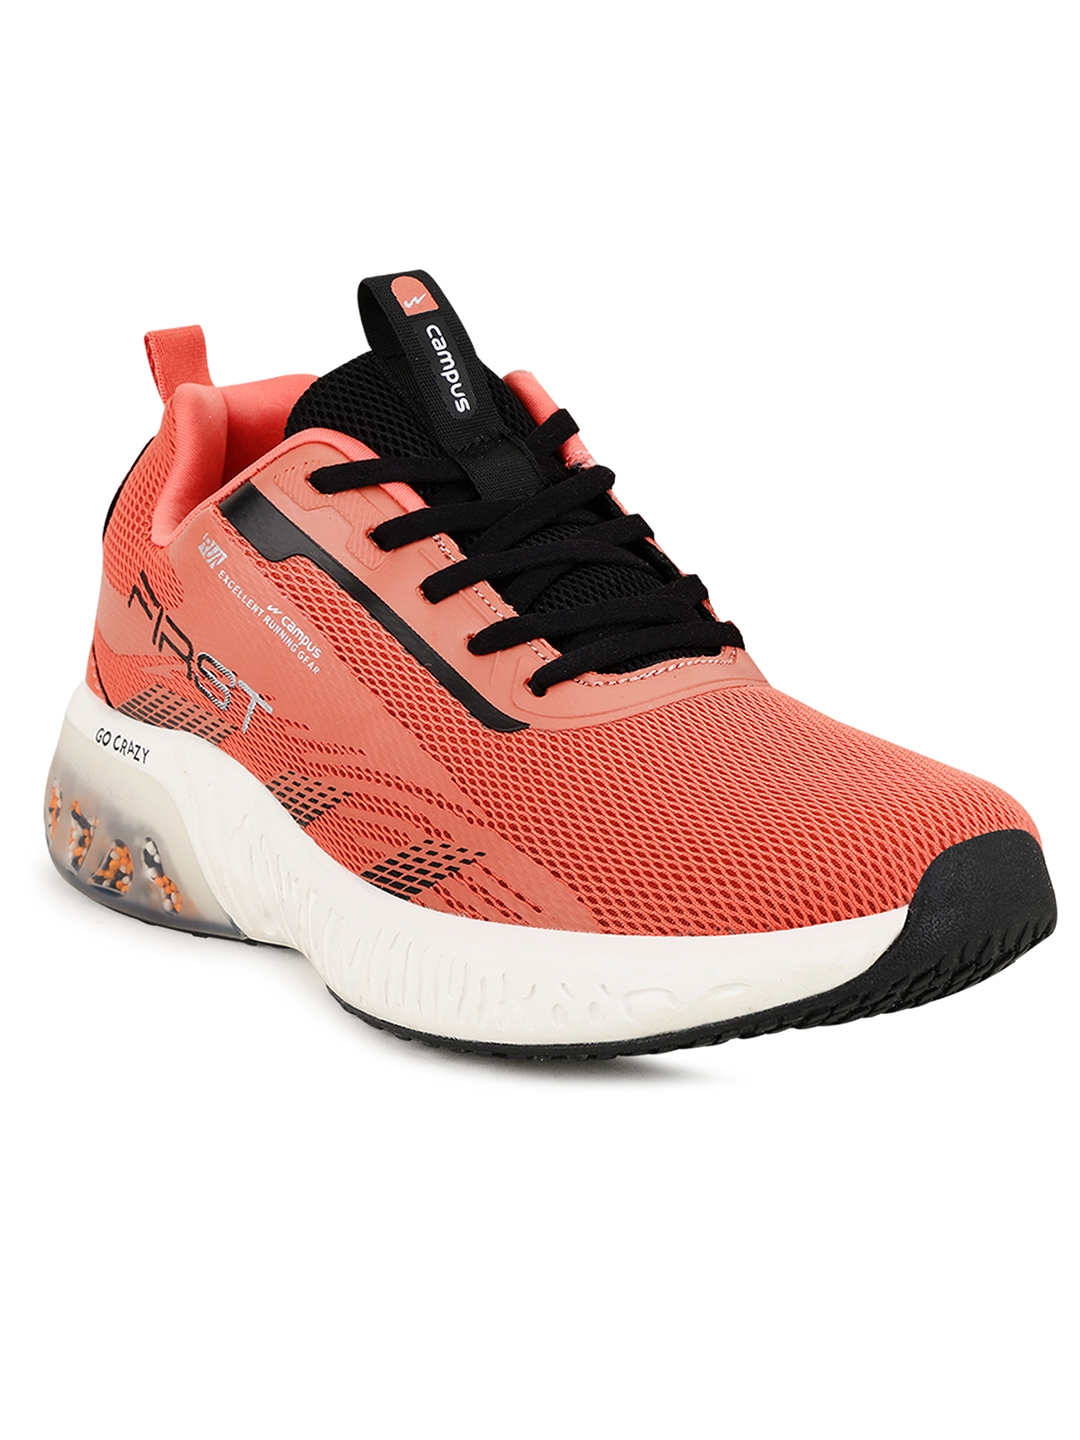 Campus Shoes | Orange First Running Shoes